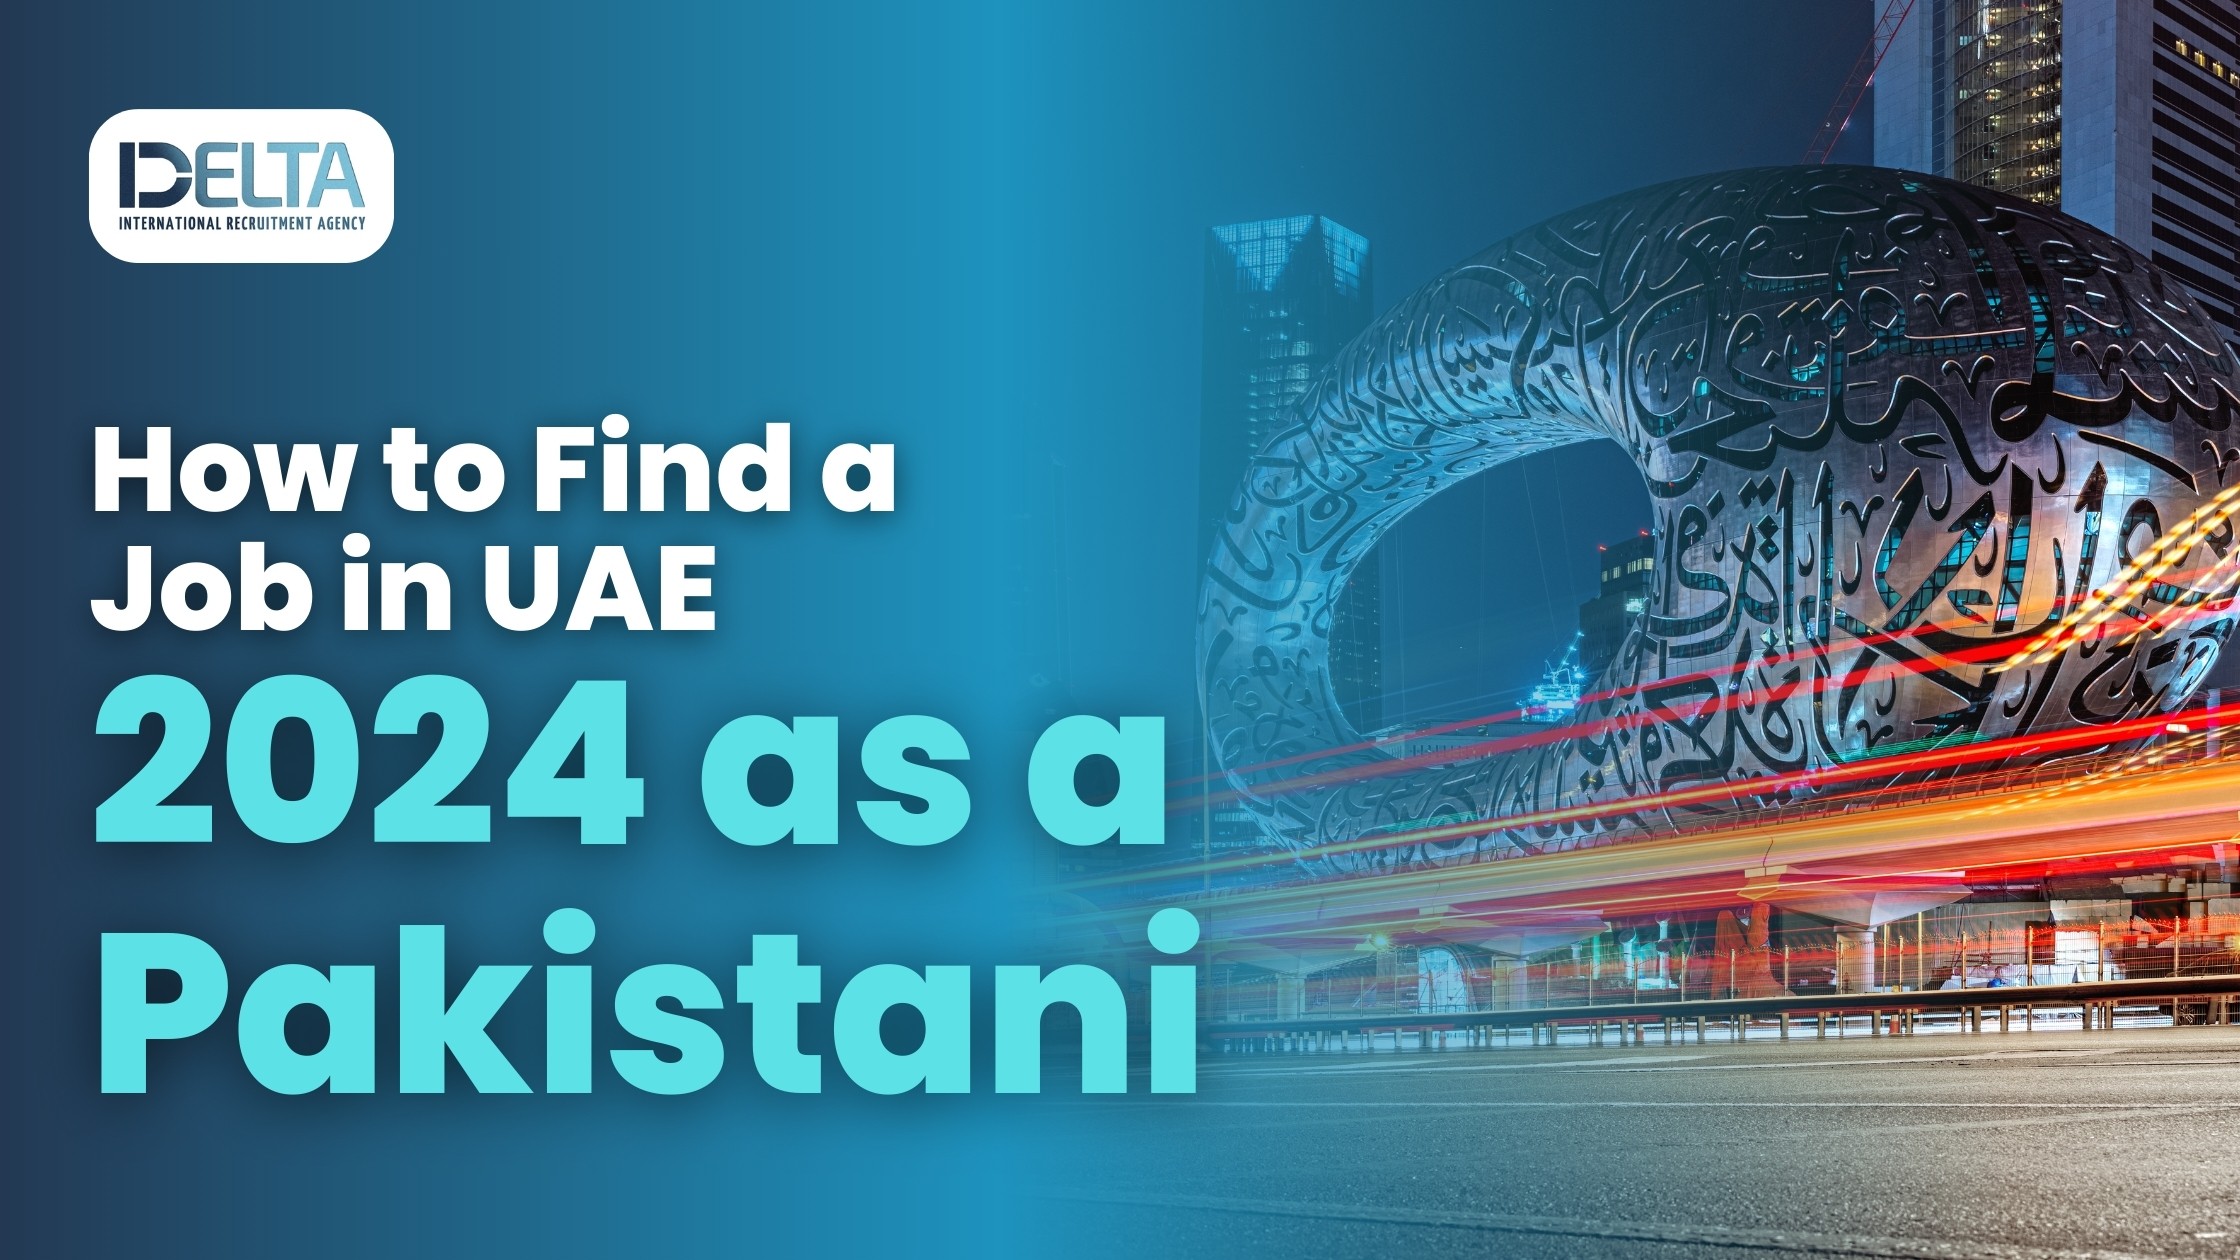 How to Find a Job in UAE 2024 as a Pakistani